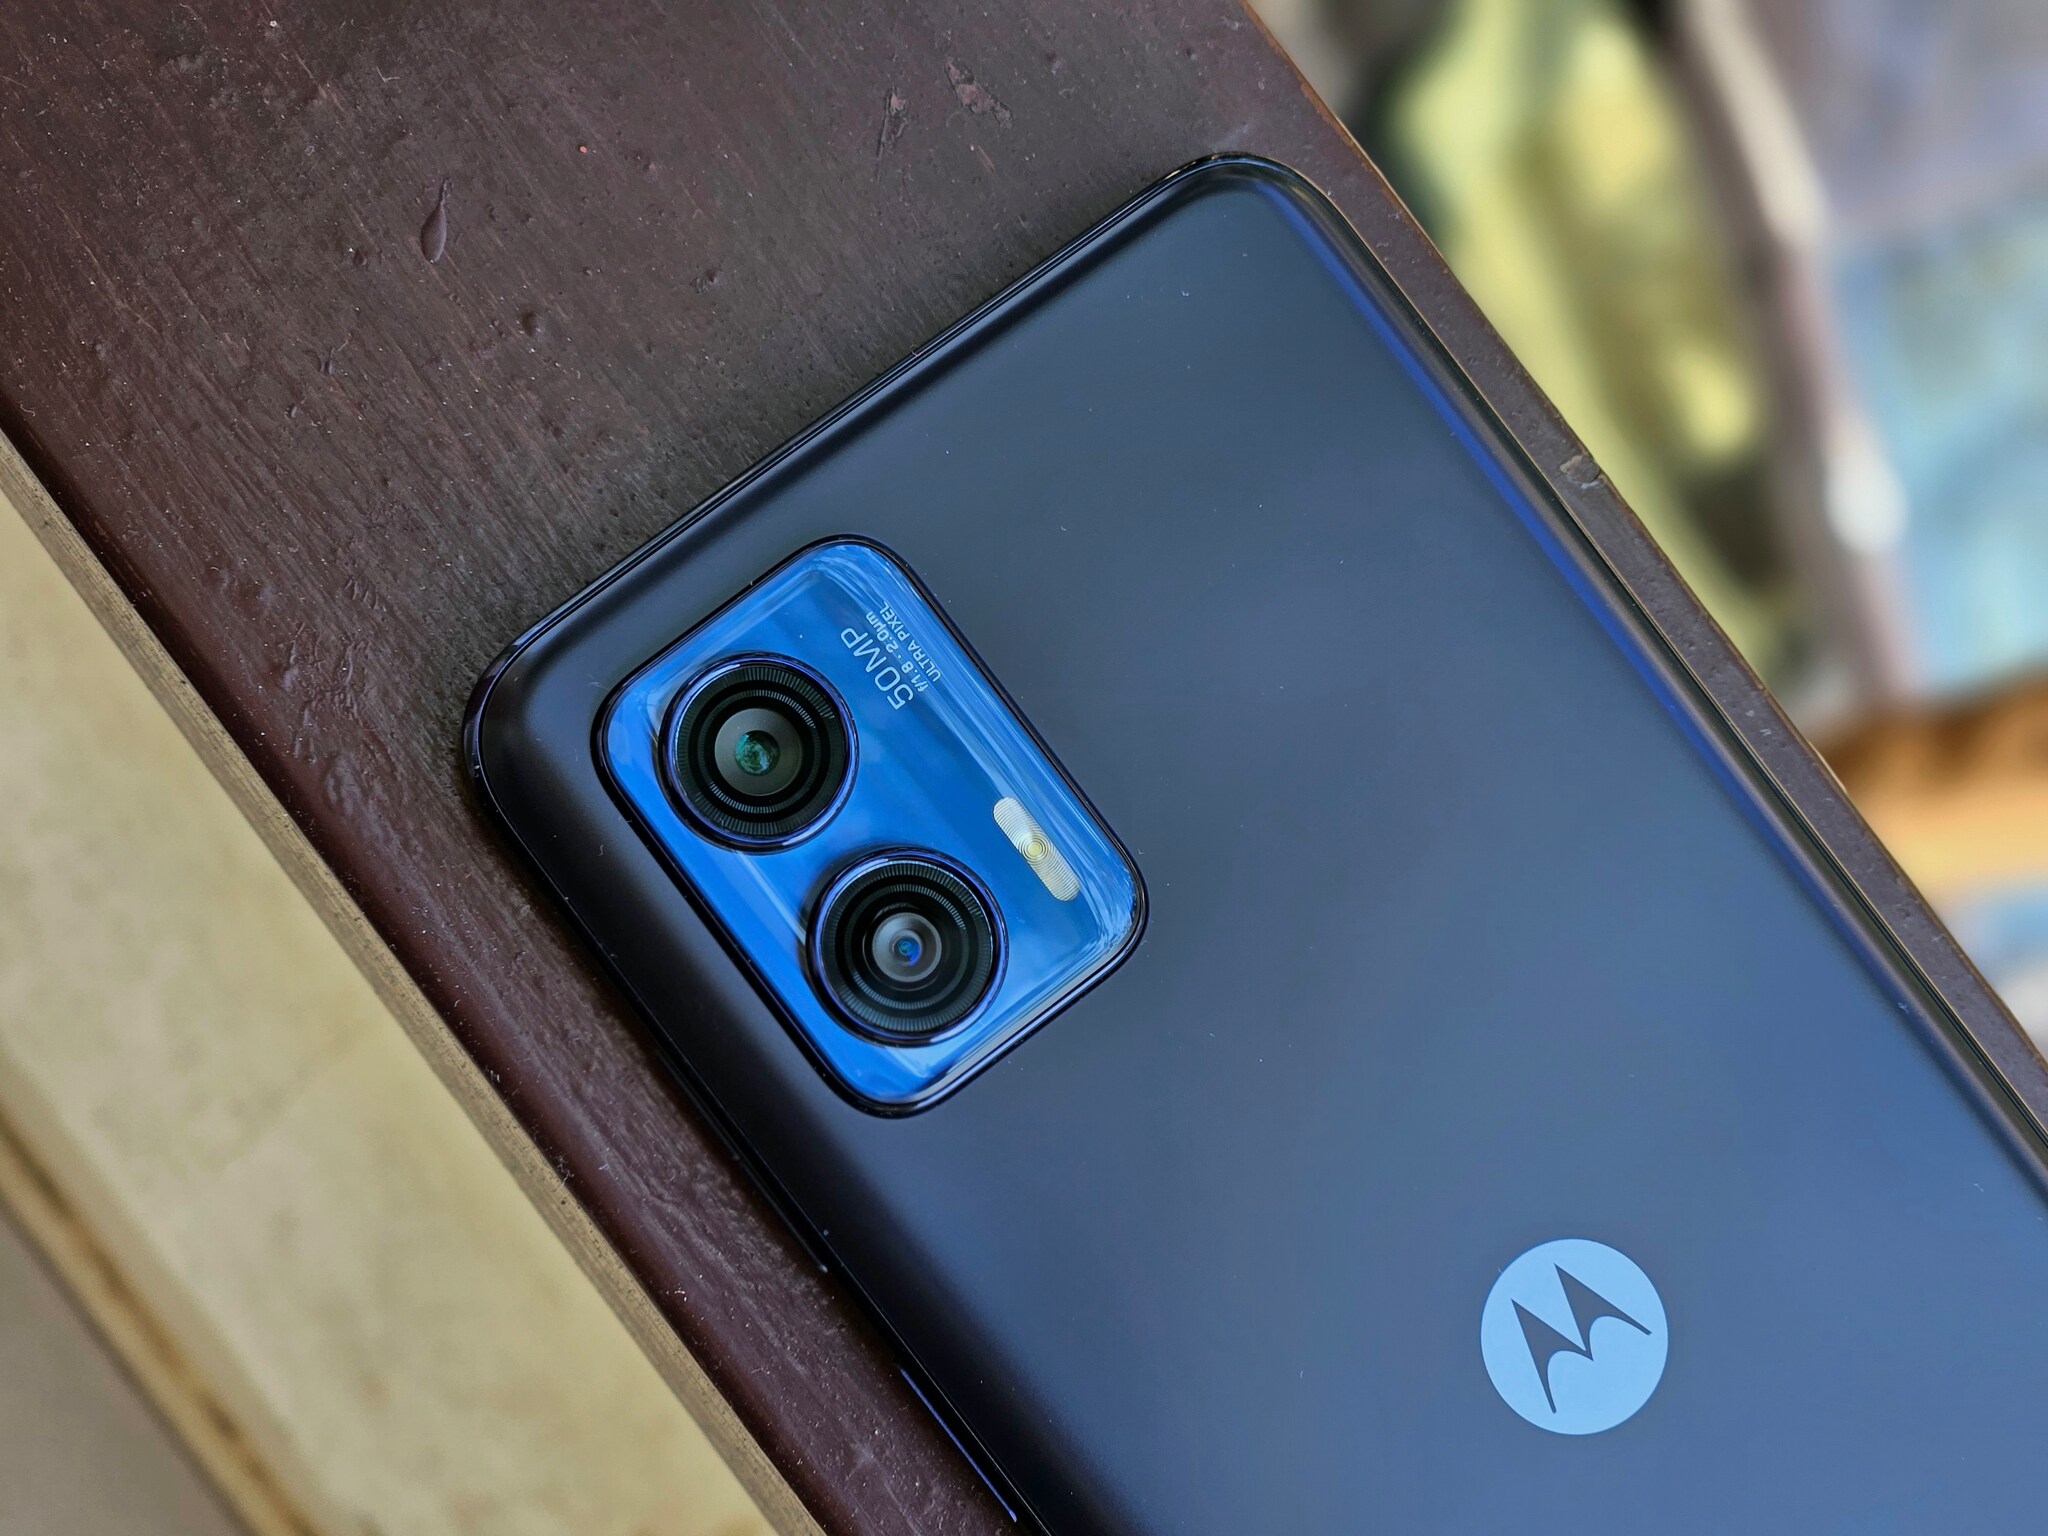 Motorola launches new phone 'moto g73 5G' with 6.5-inch display in India